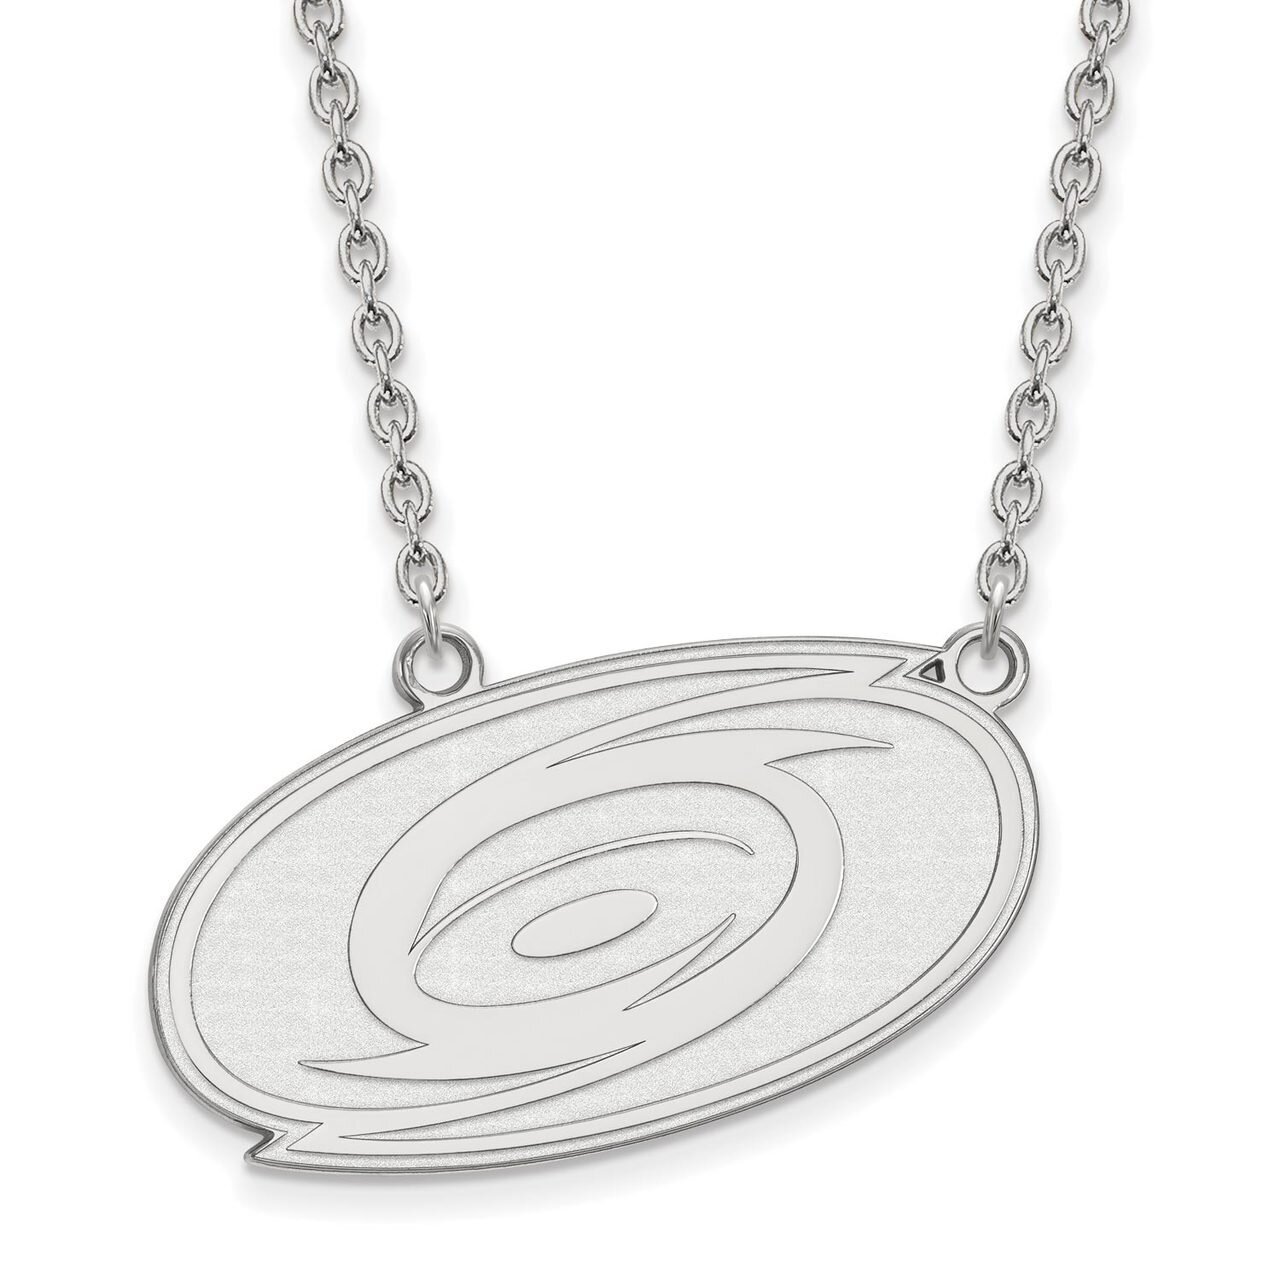 Carolina Hurricanes Large Pendant with Chain Necklace Sterling Silver SS008HUR-18